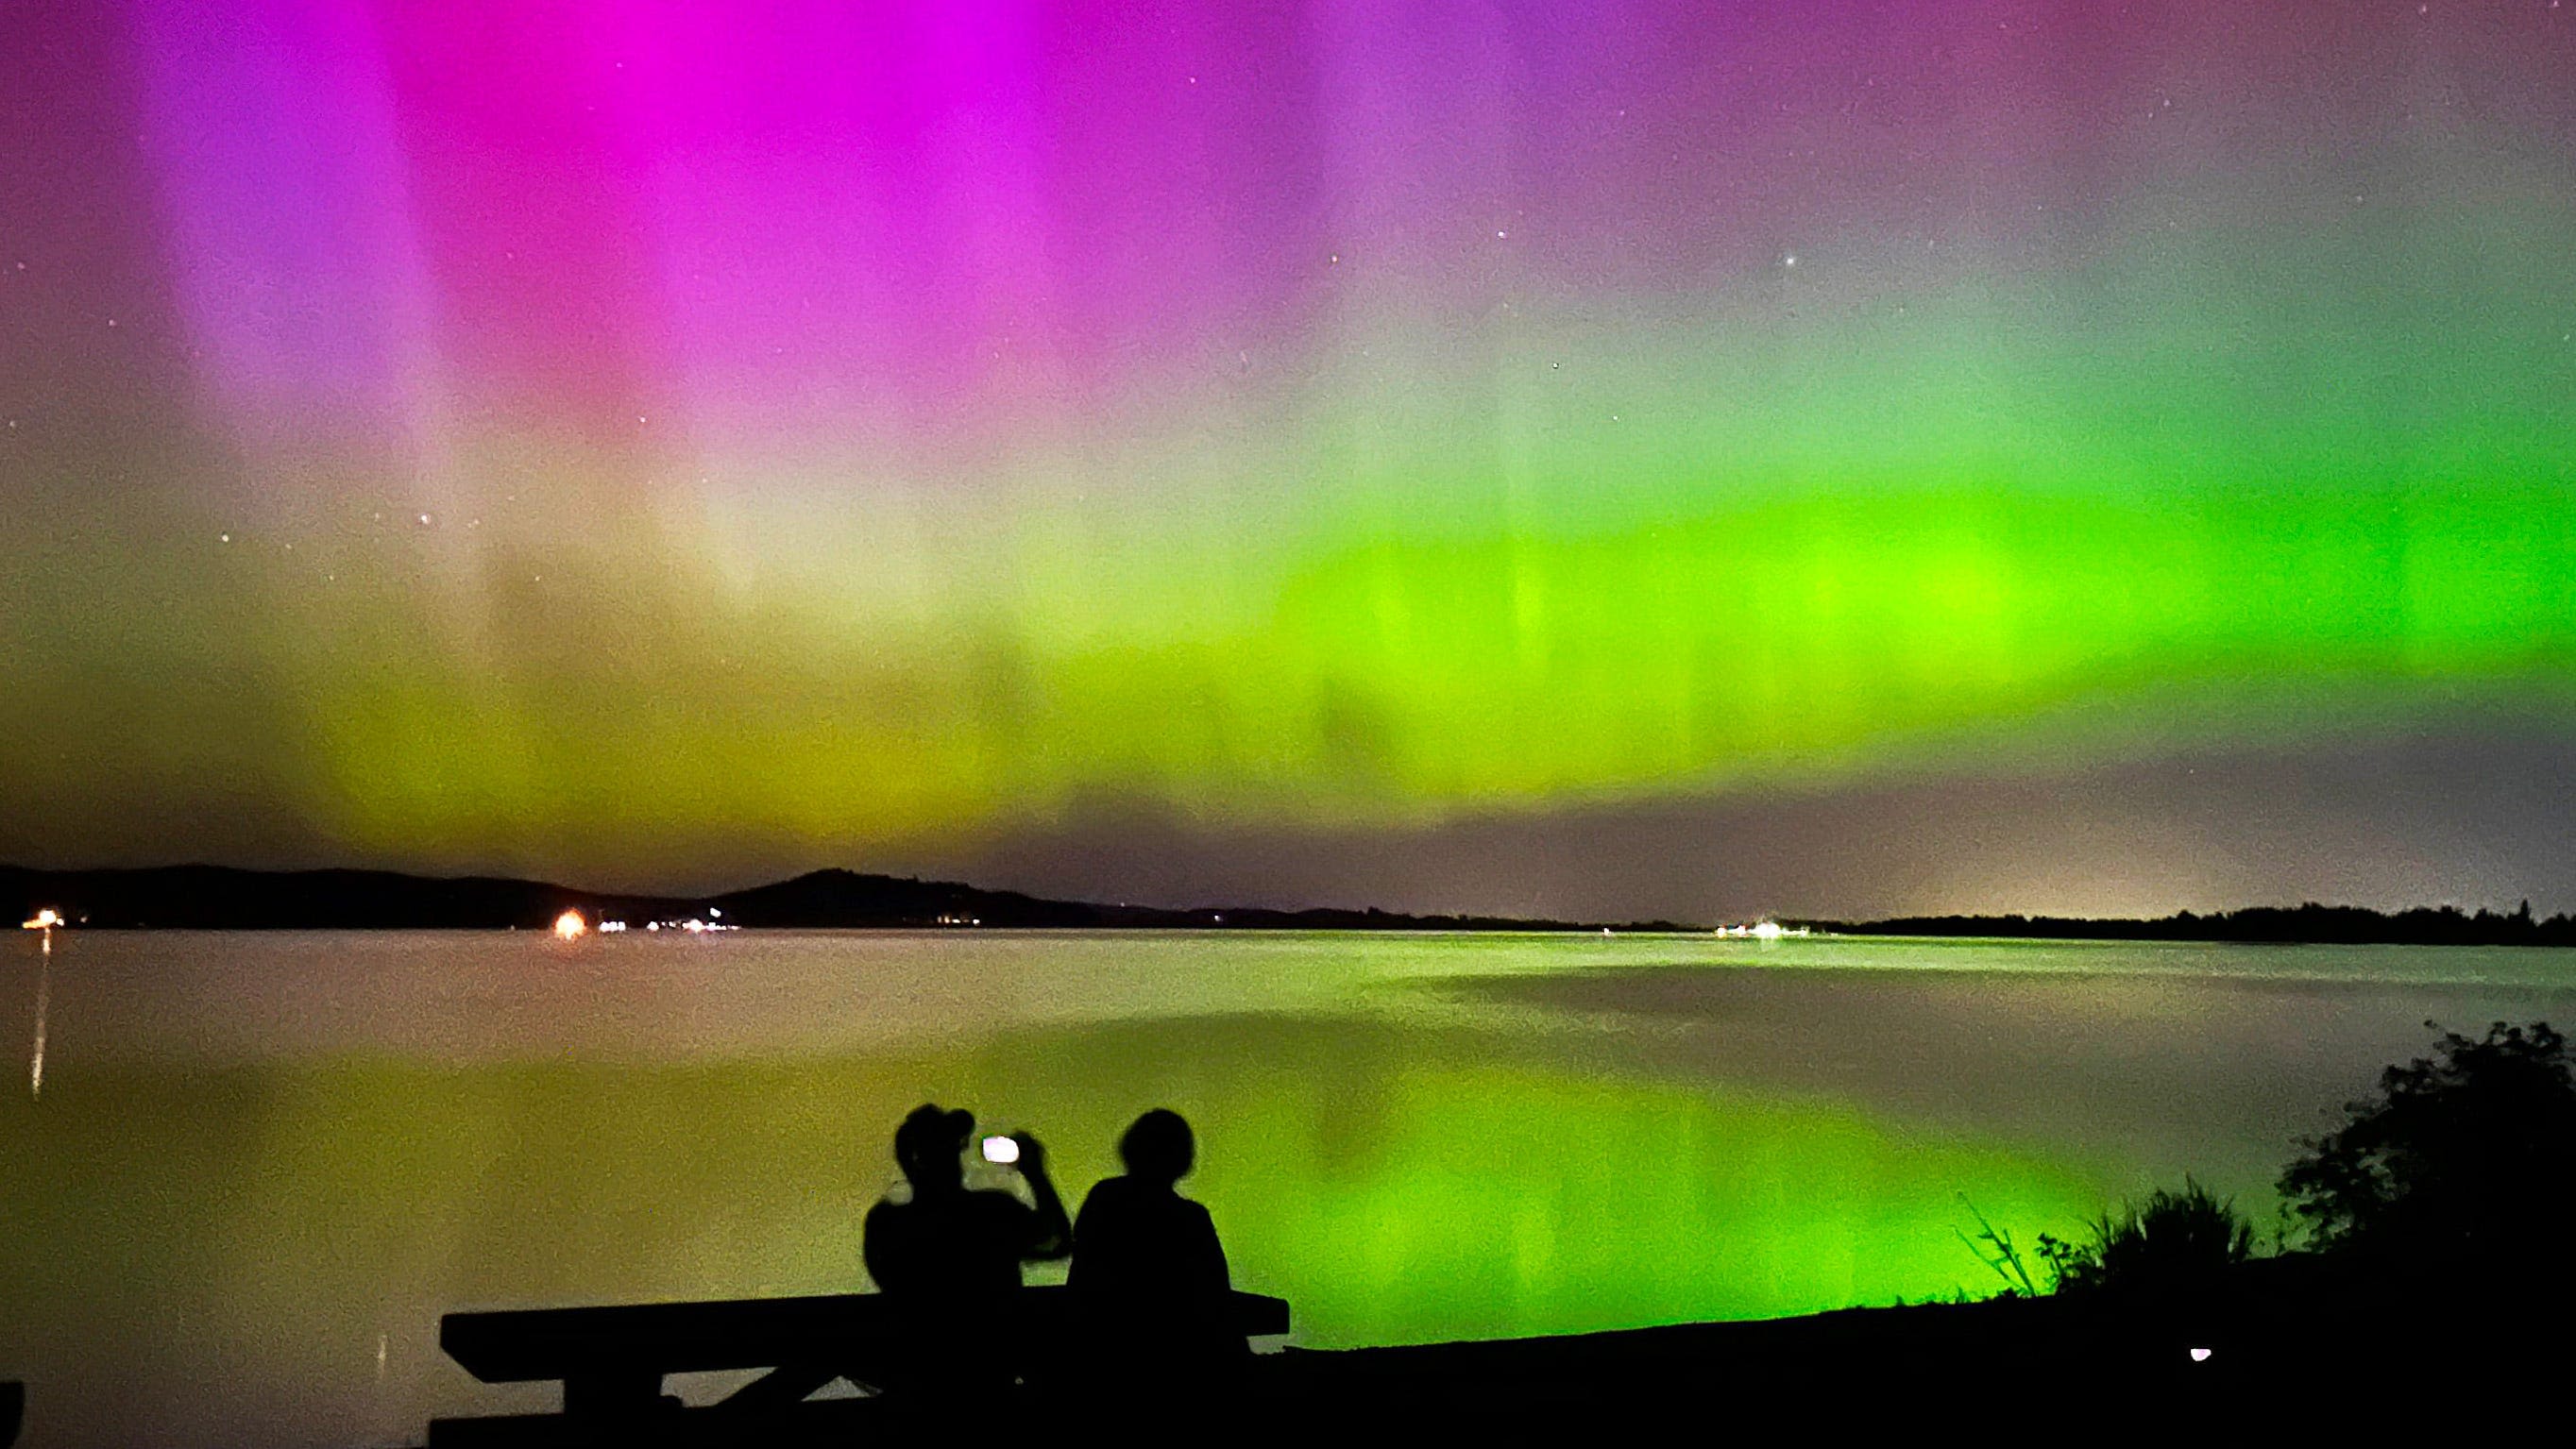 Will we see the northern lights again Sunday? Here's the latest forecast